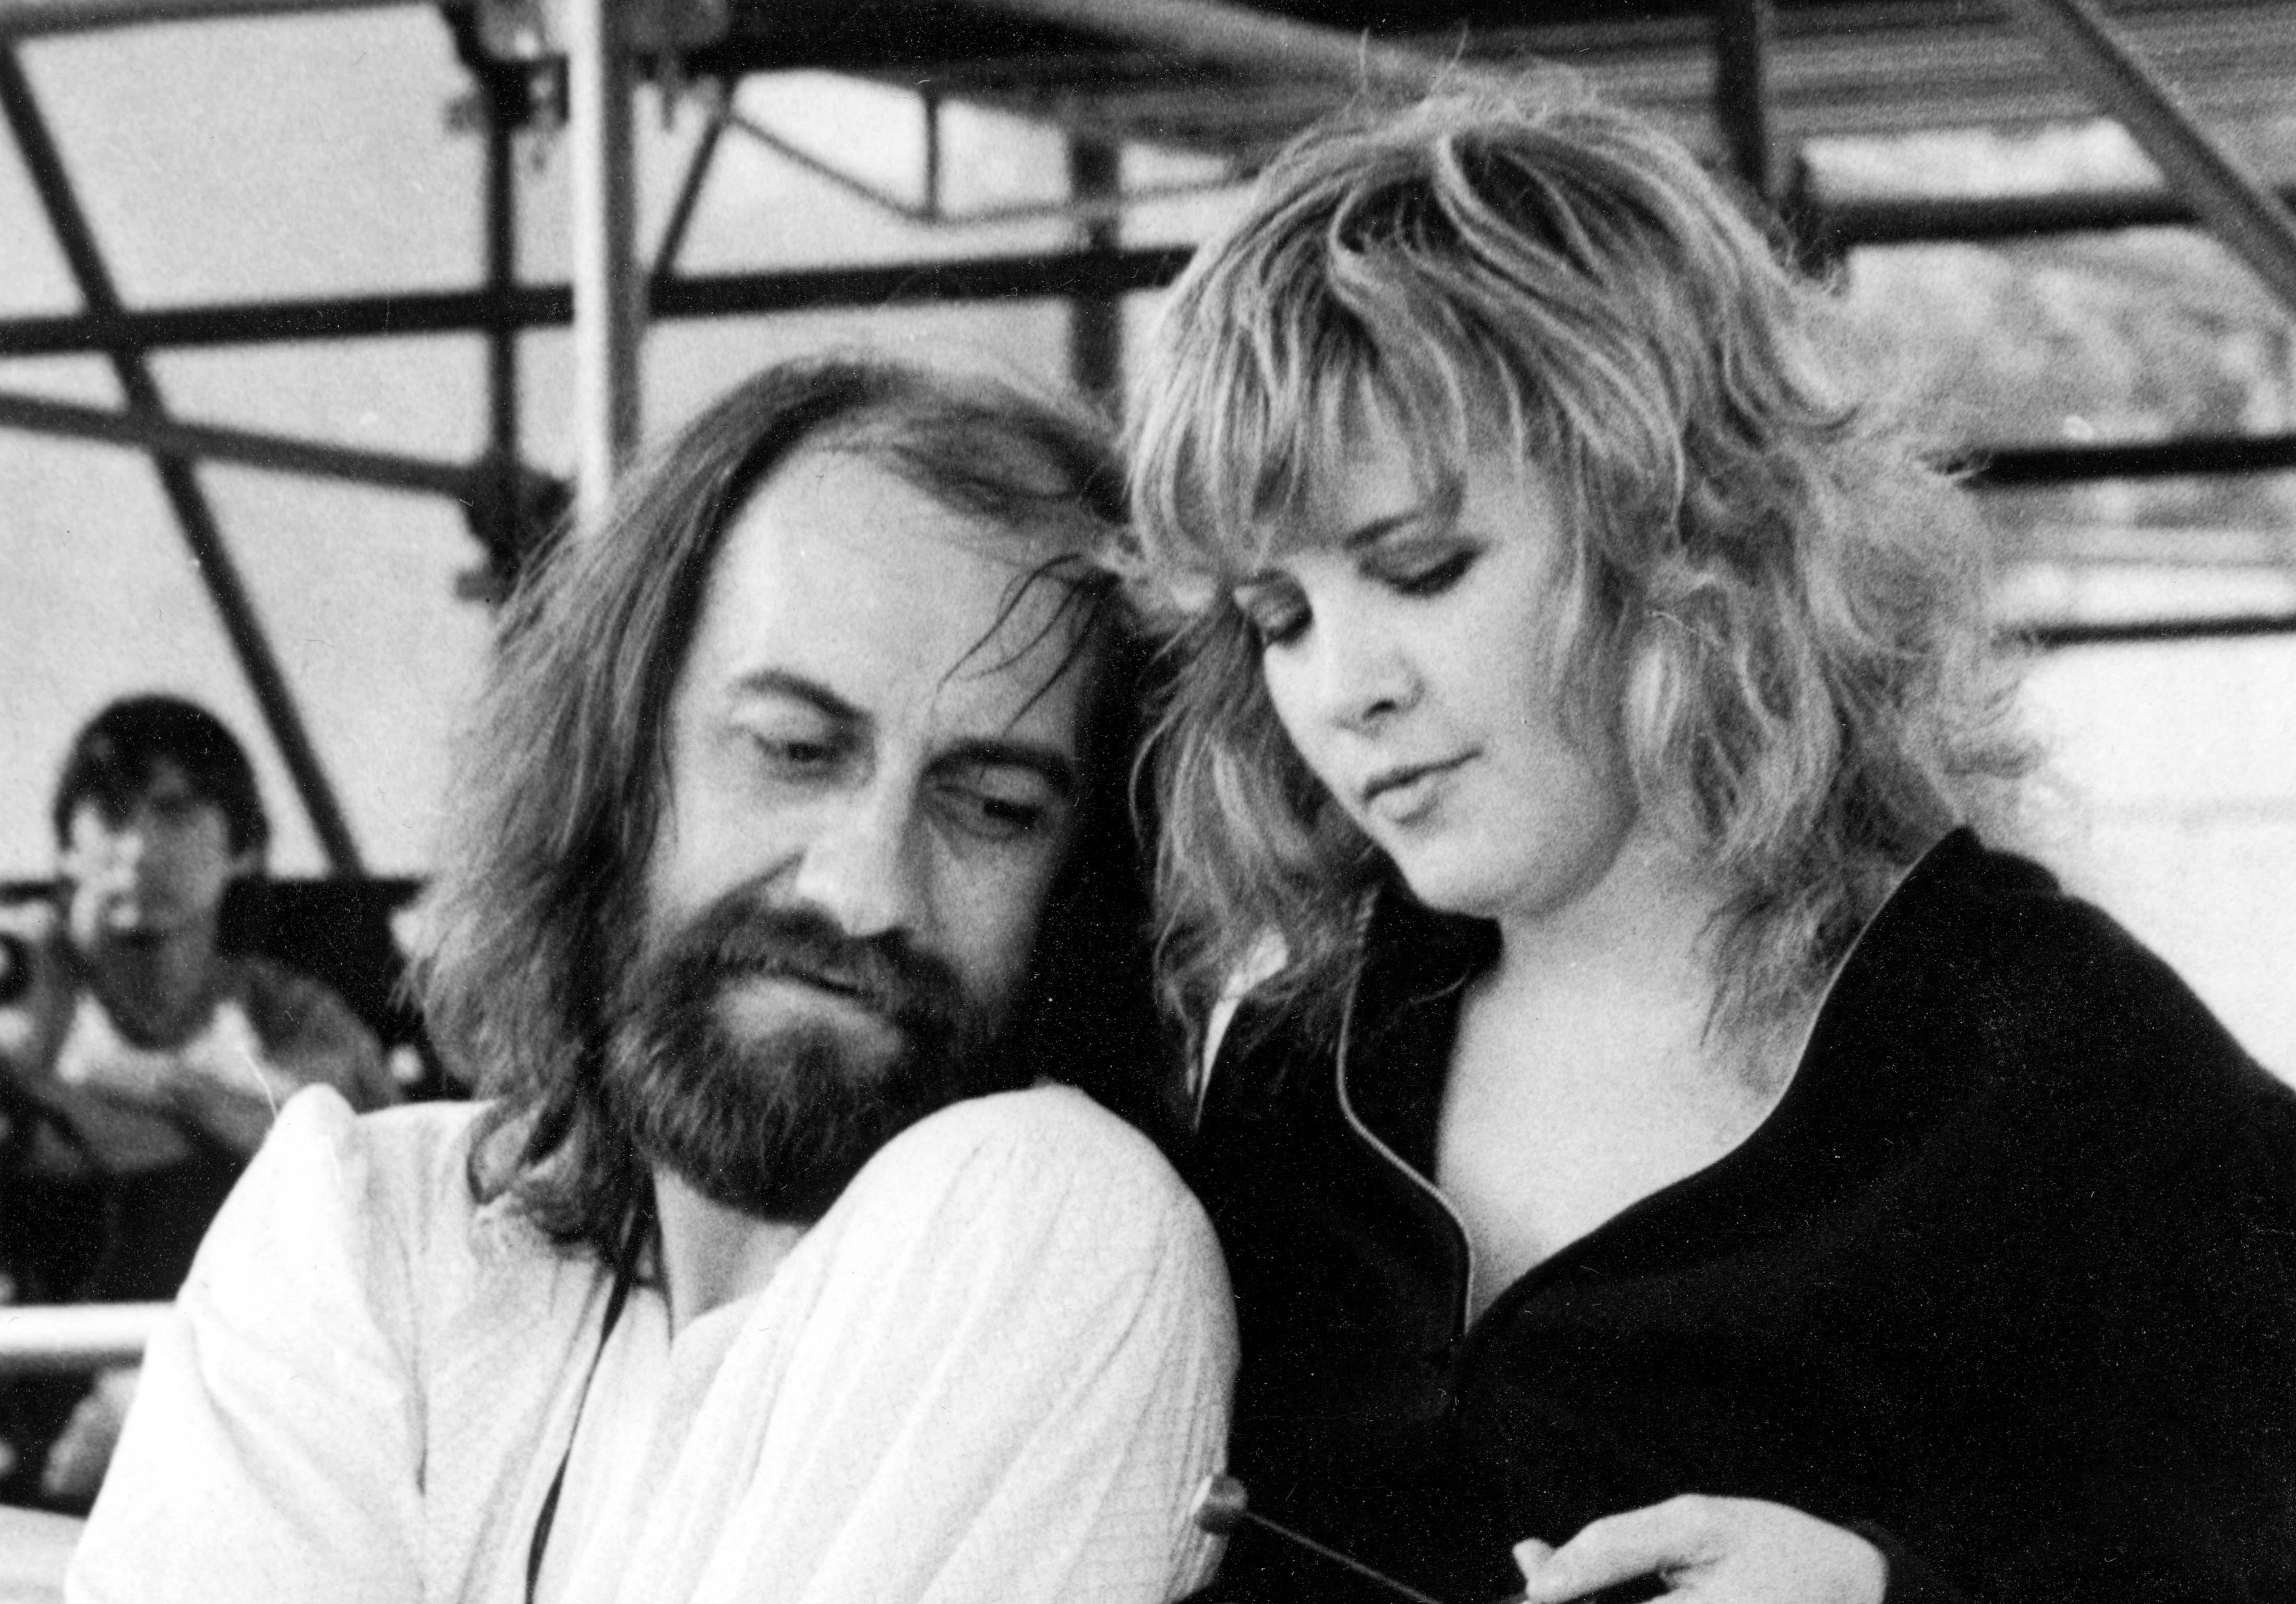 A black and white picture of Mick Fleetwood and Stevie Nicks. Mick Fleetwood sits while Stevie Nicks stands behind him.